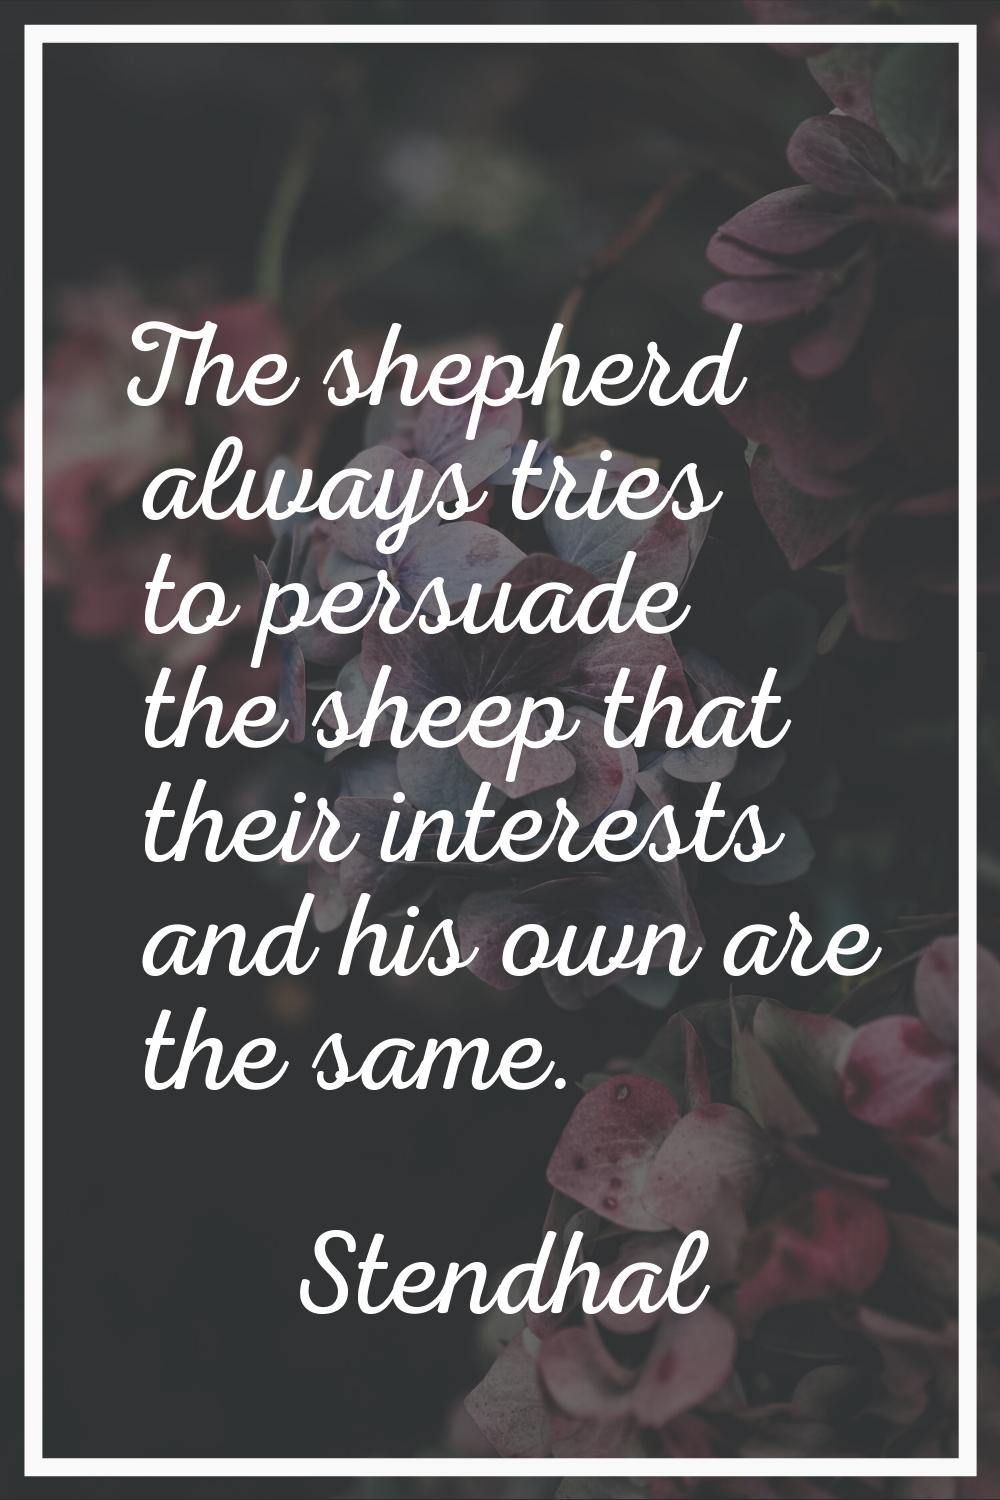 The shepherd always tries to persuade the sheep that their interests and his own are the same.